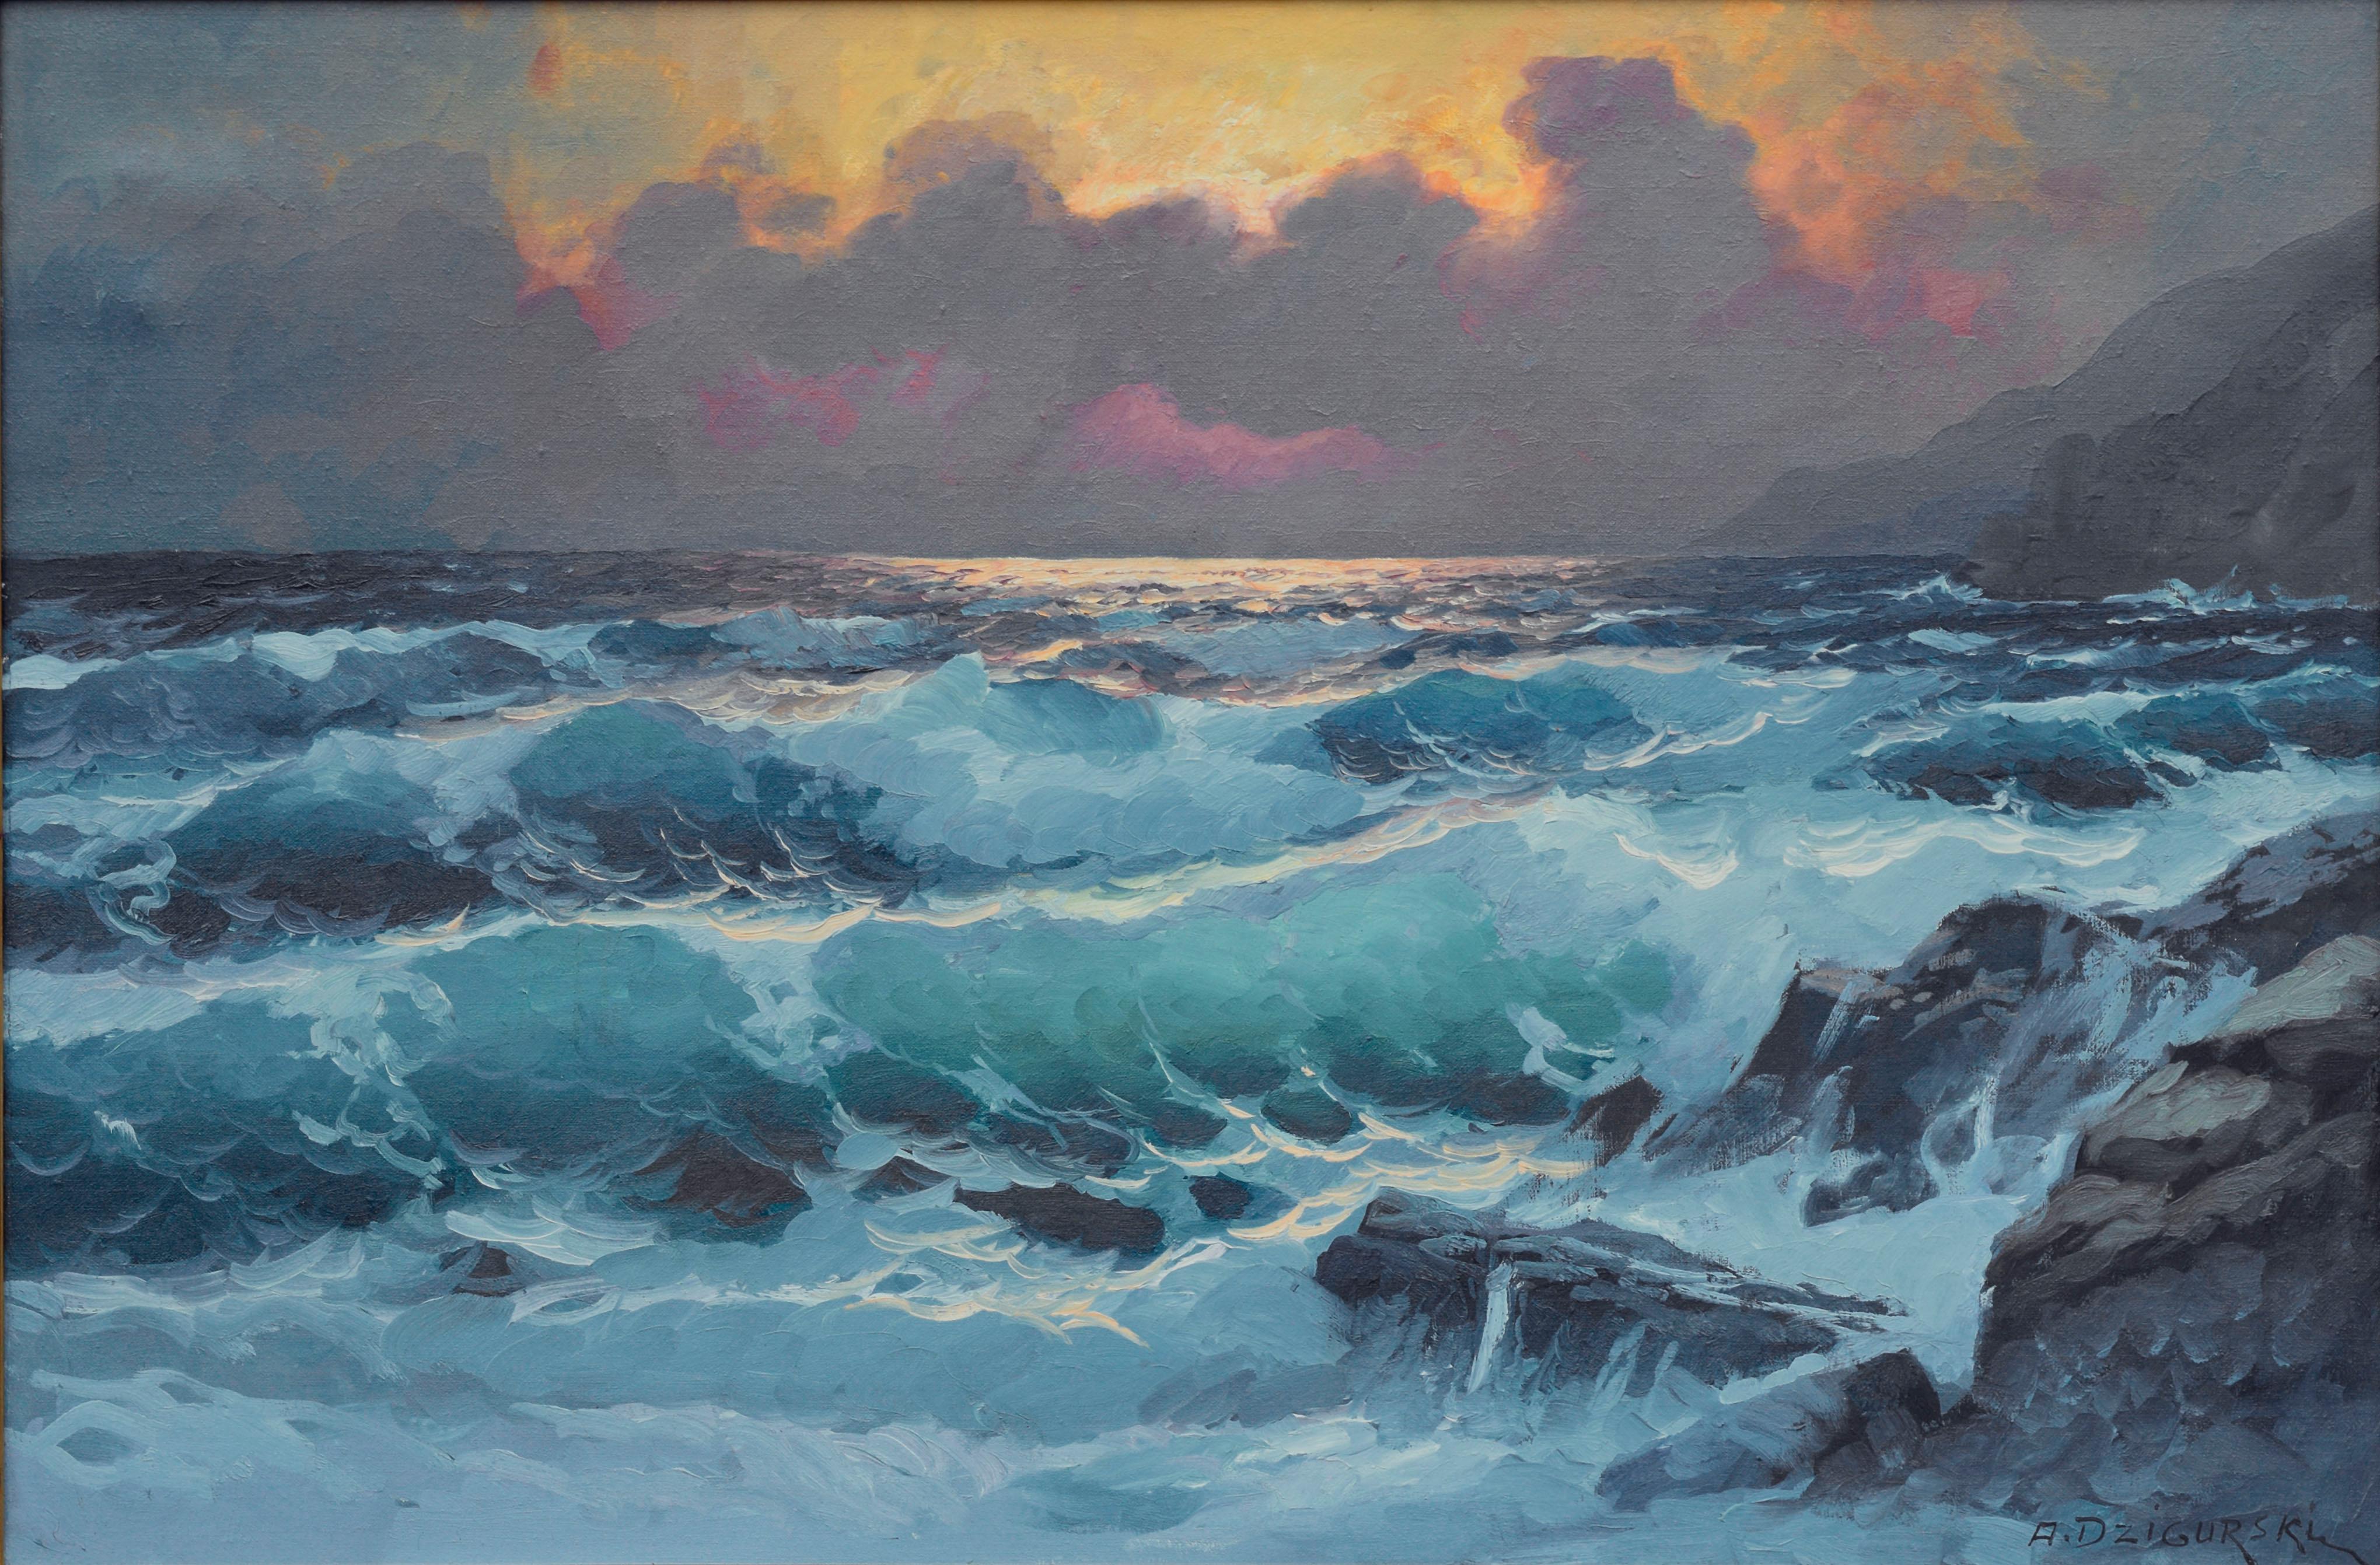 Sun Through the Clouds and the Waves - Big Sur Seascape - Painting by Alexander Dzigurski